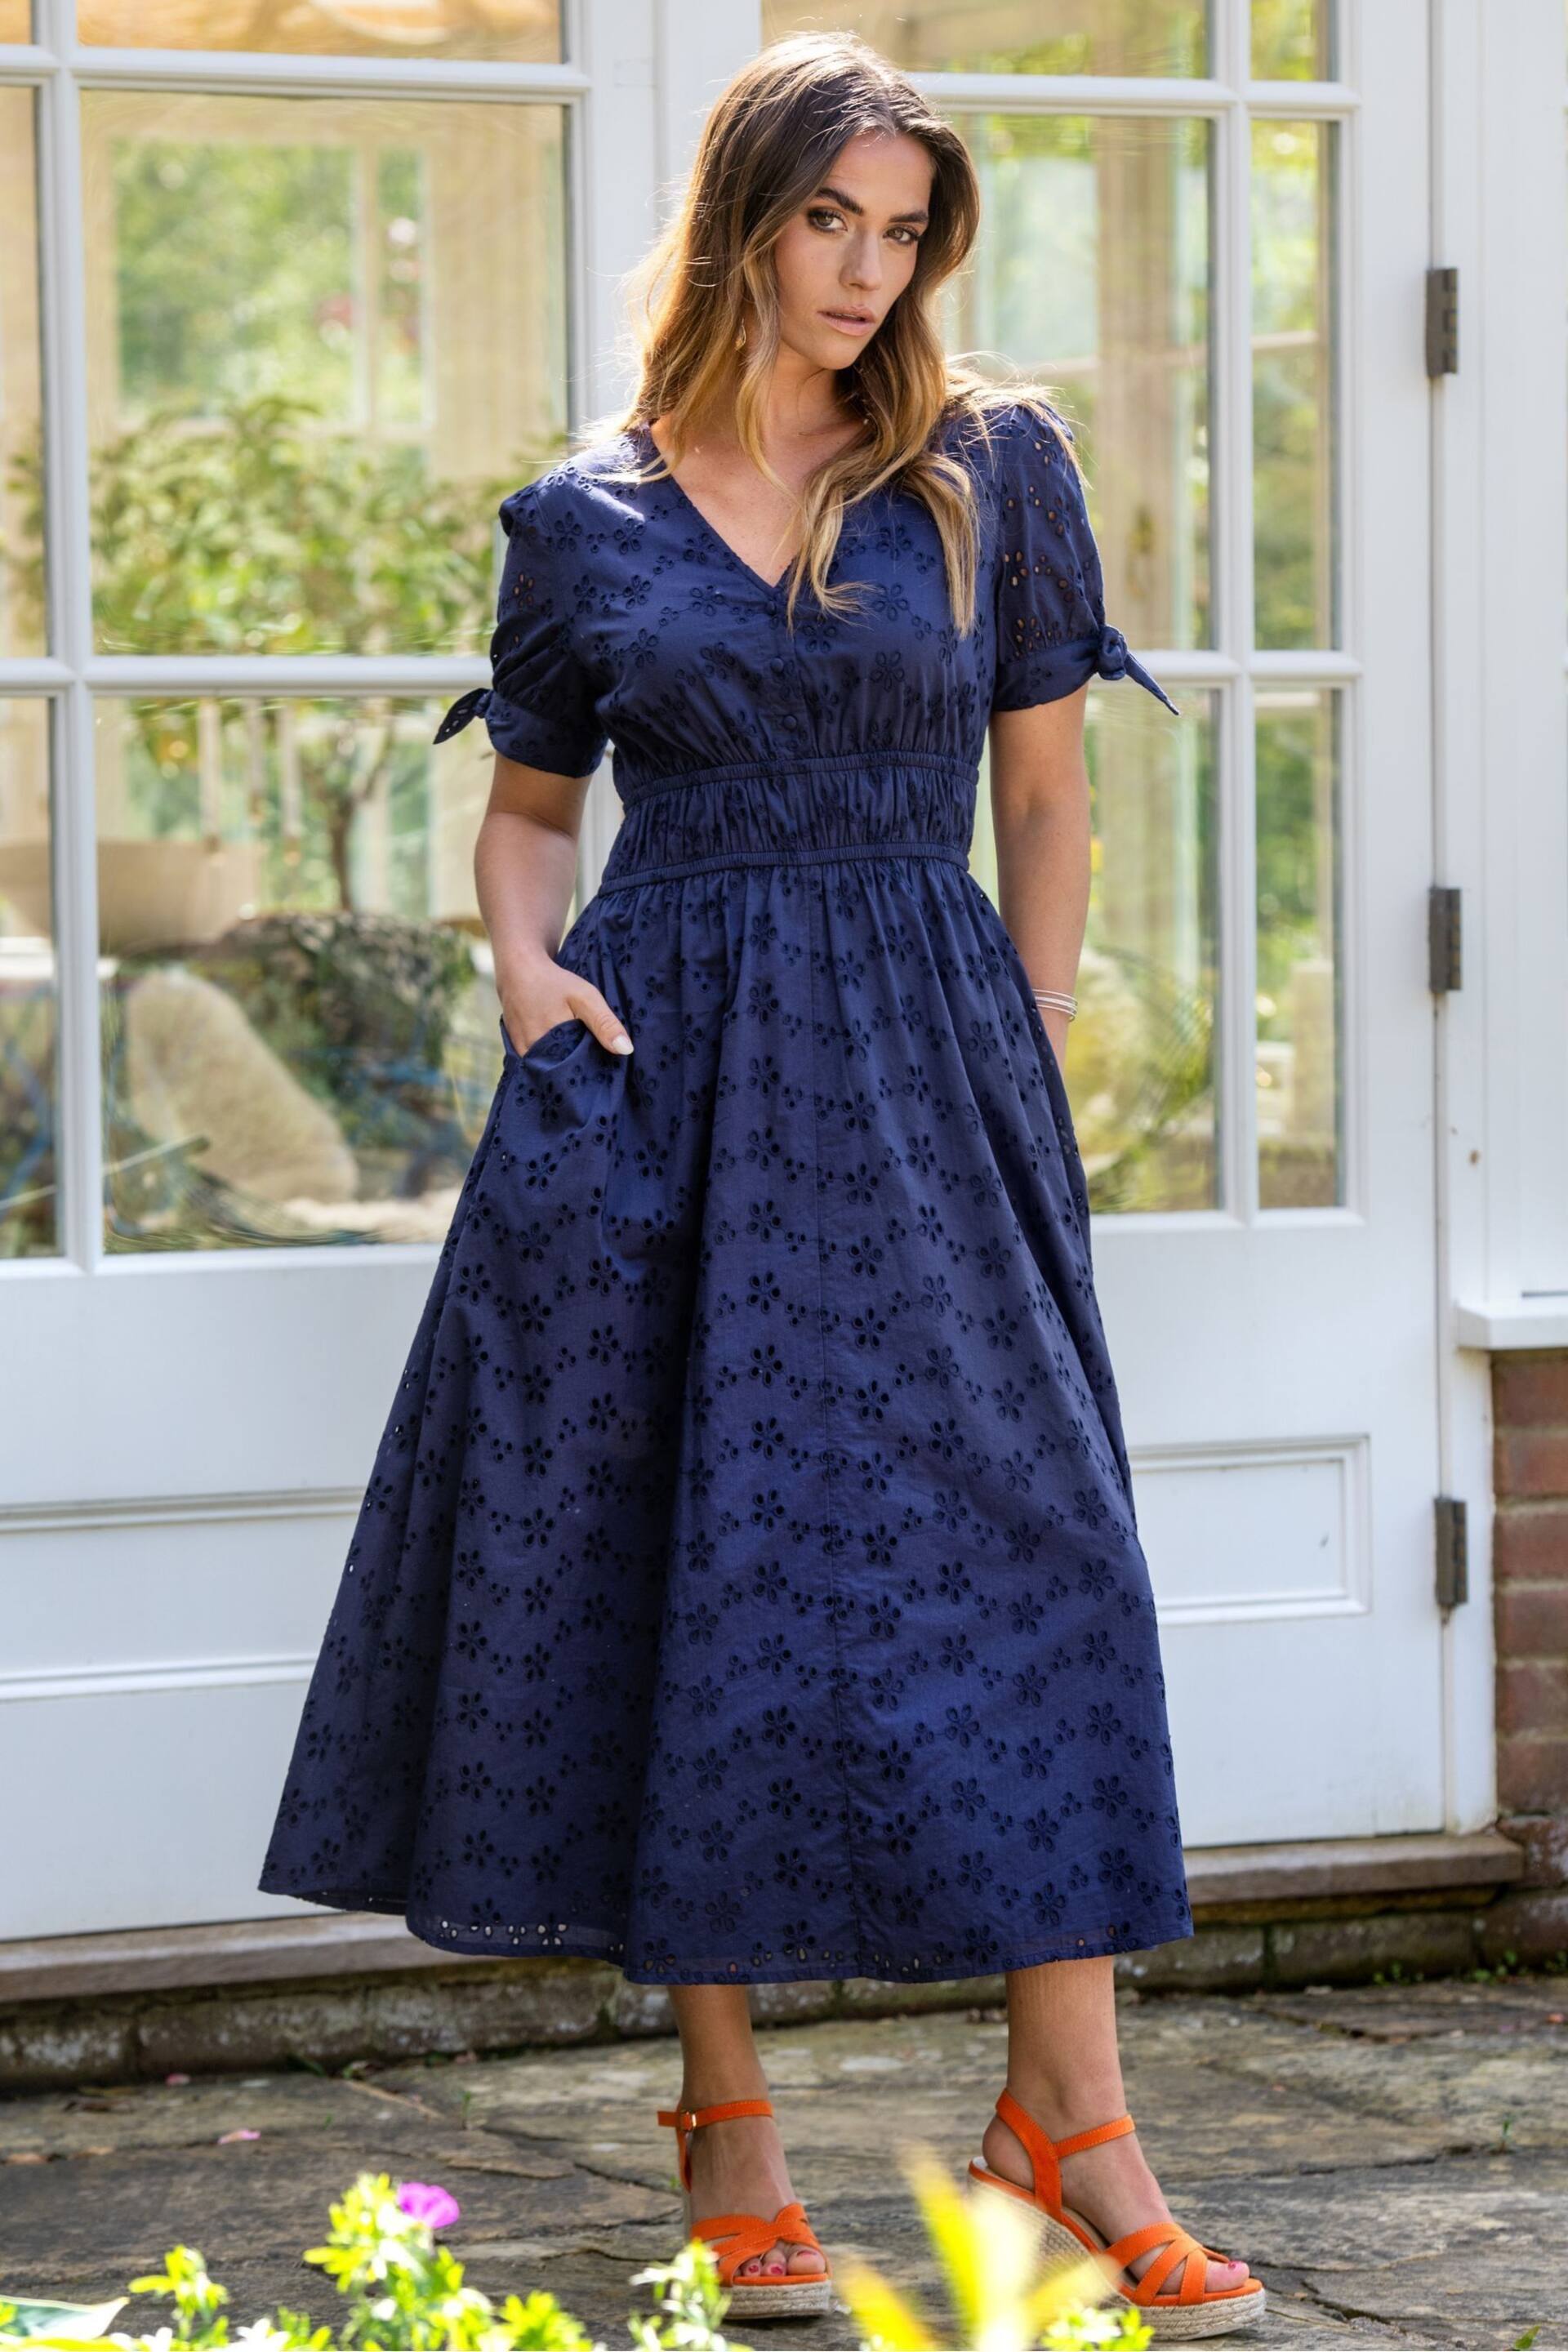 Pour Moi Blue Amanda Fuller Bust Cotton Broderie Tiered Midaxi Dress - Image 1 of 4